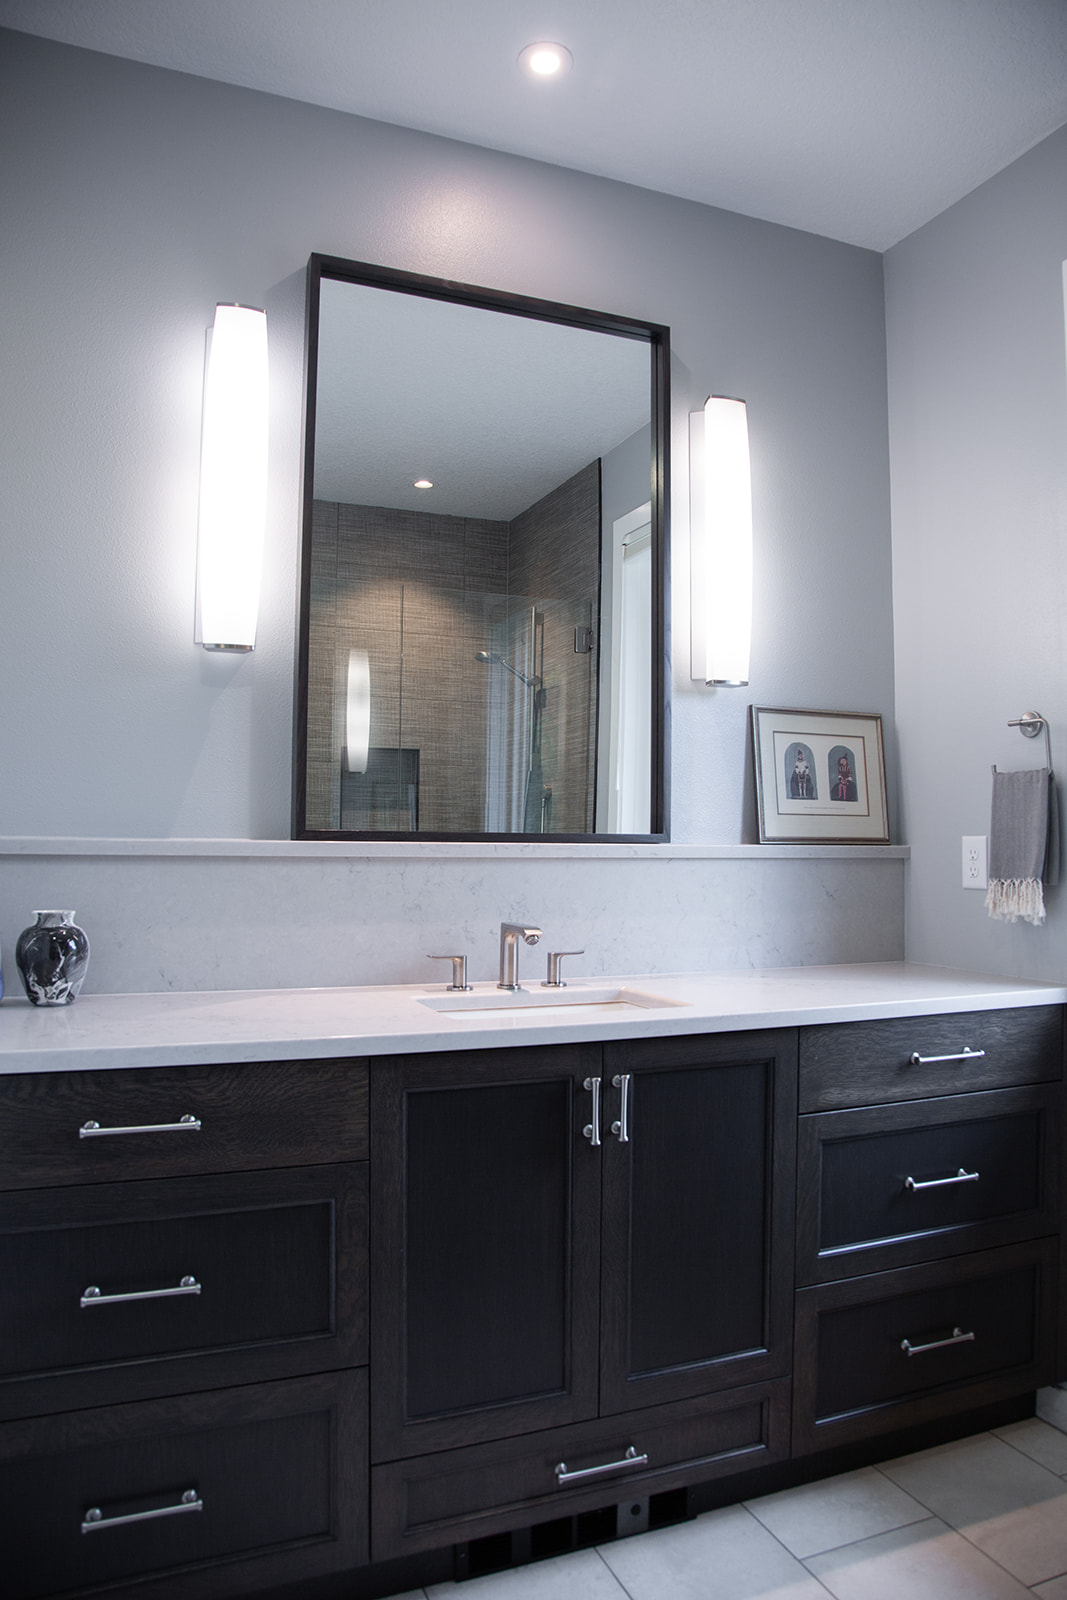 guest bath vanity with dark stained cabinets and quartz countertop, wall sconces with framed mirror